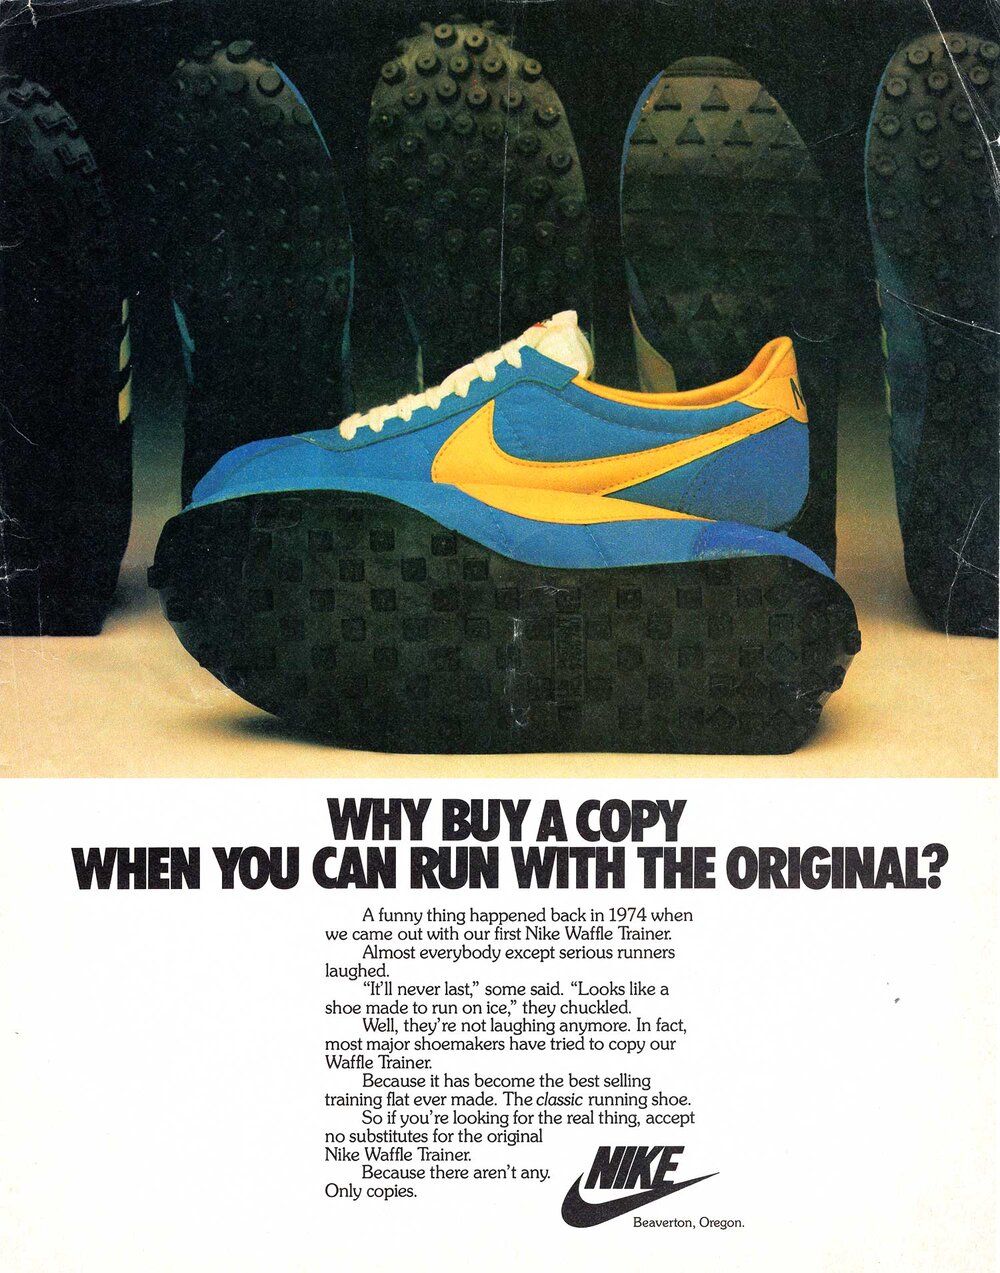 The Deffest®. A vintage and retro sneaker blog. — Nike Waffle Trainer 1979 vintage sneaker